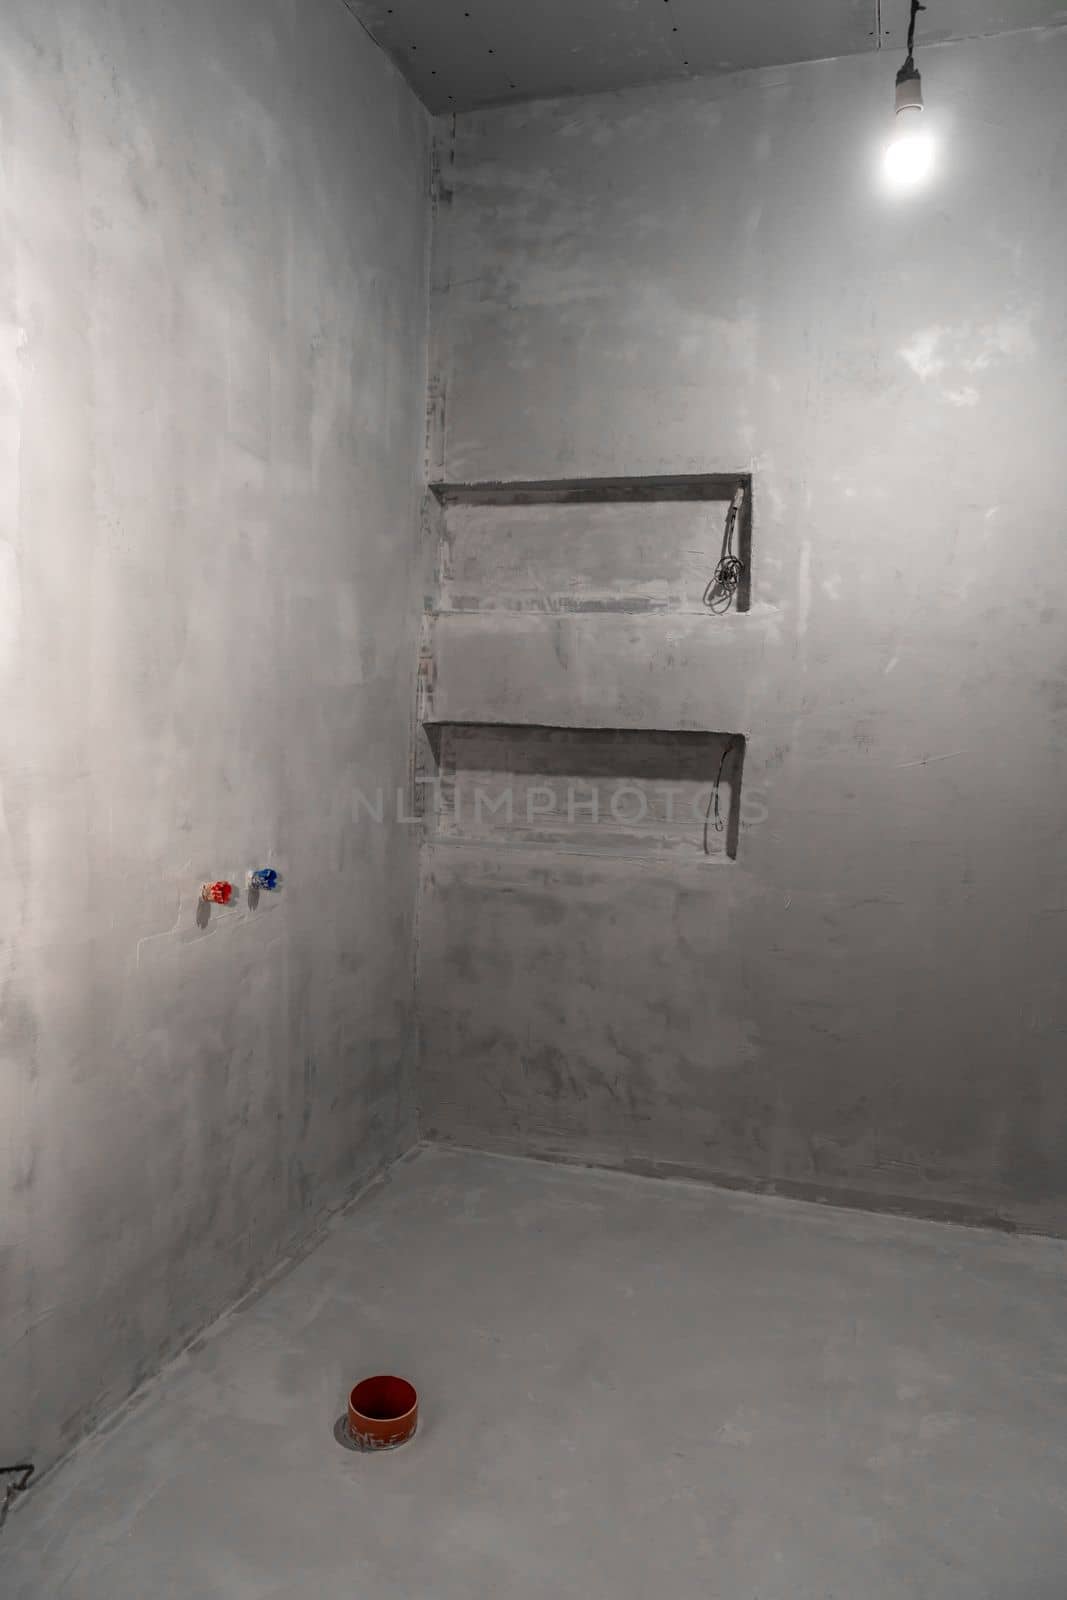 room under construction of a new house by Edophoto